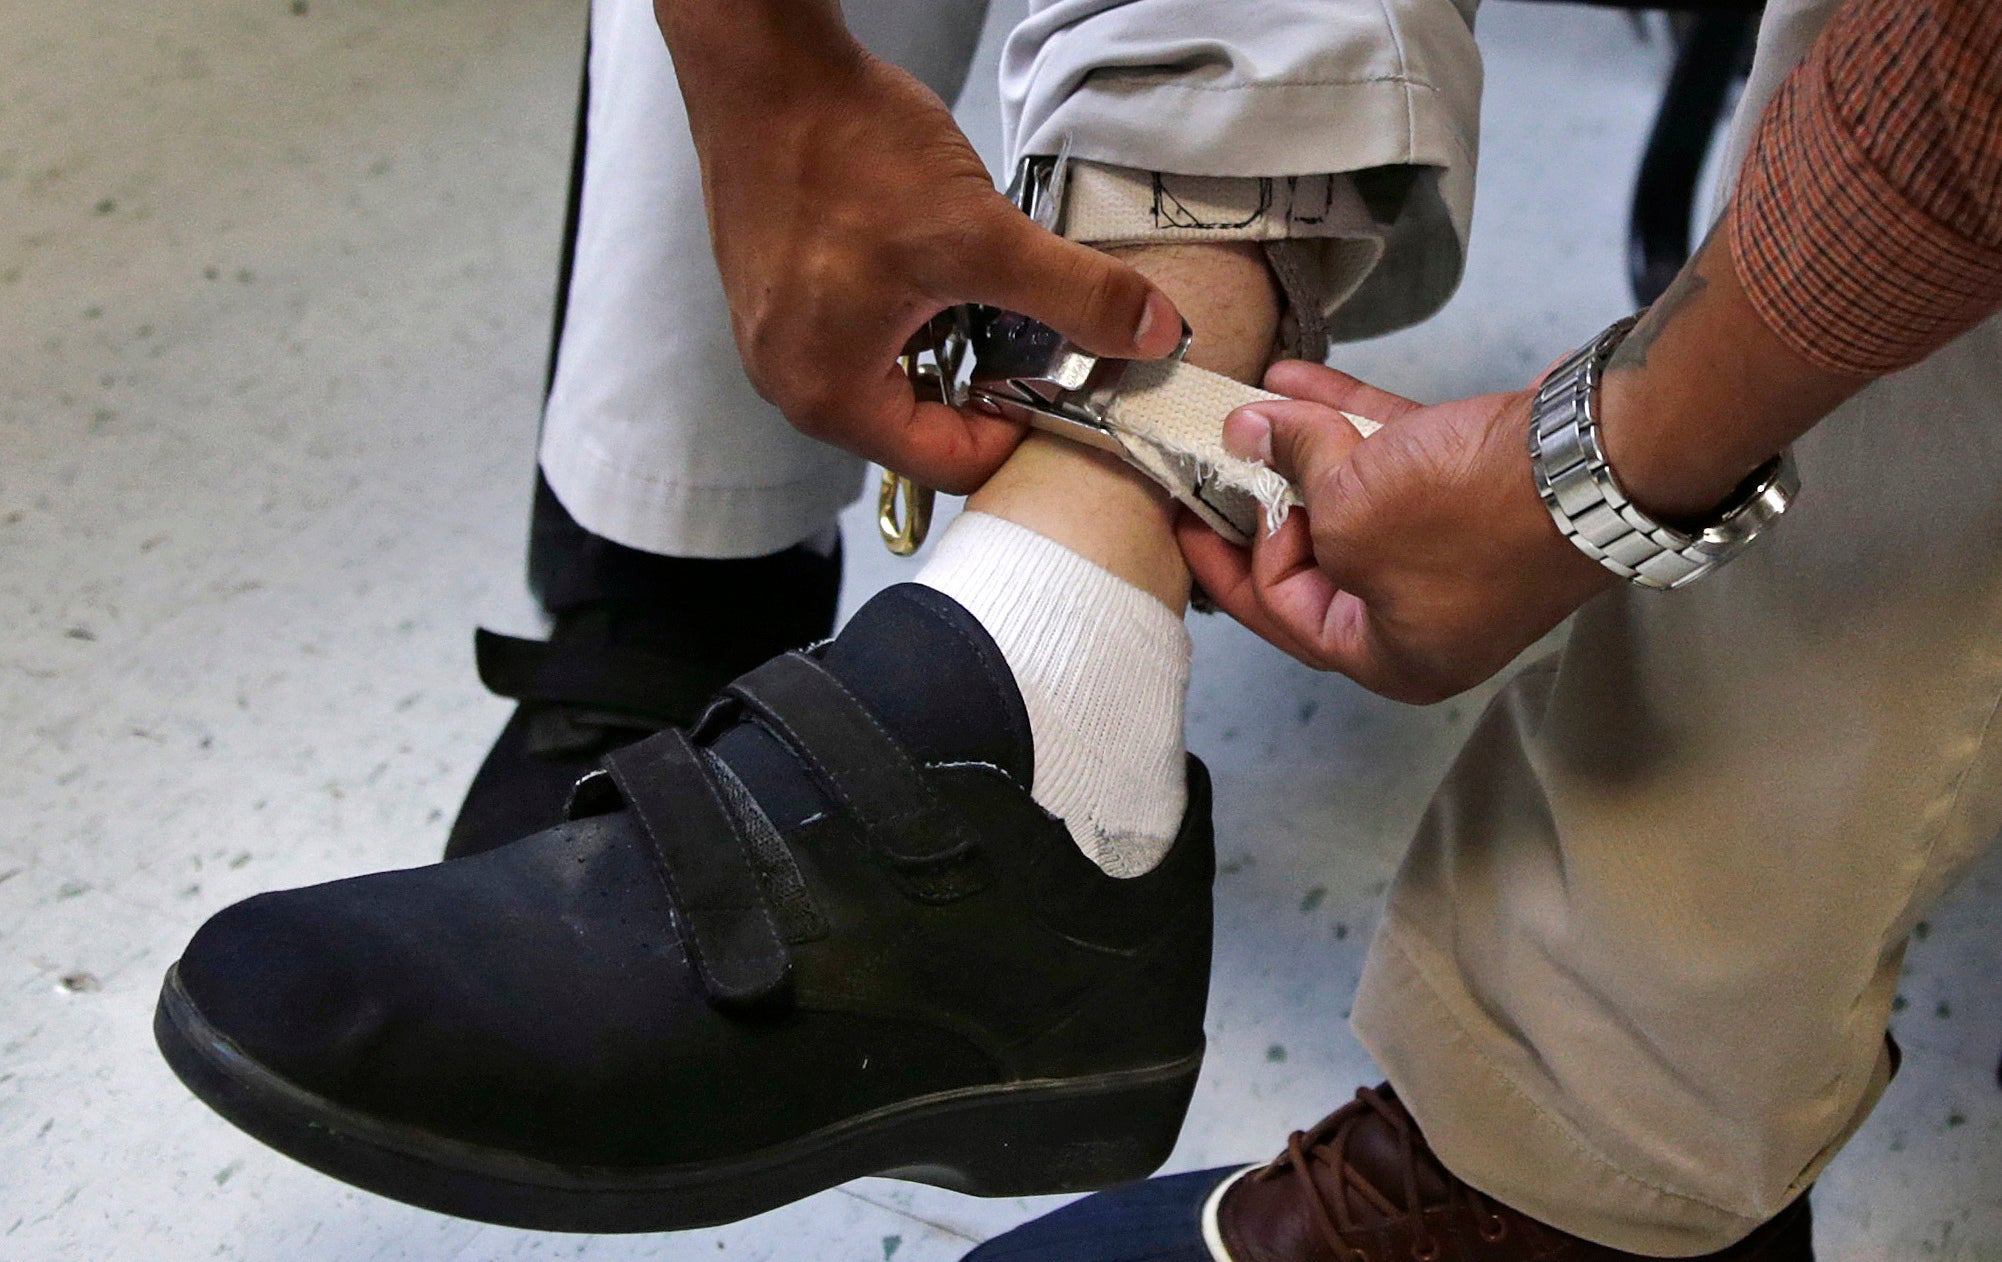 <p>Staff check the ankle strap of an electrical shocking device on a student during an exercise programme at the Judge Rotenberg Educational Center in Canton</p>